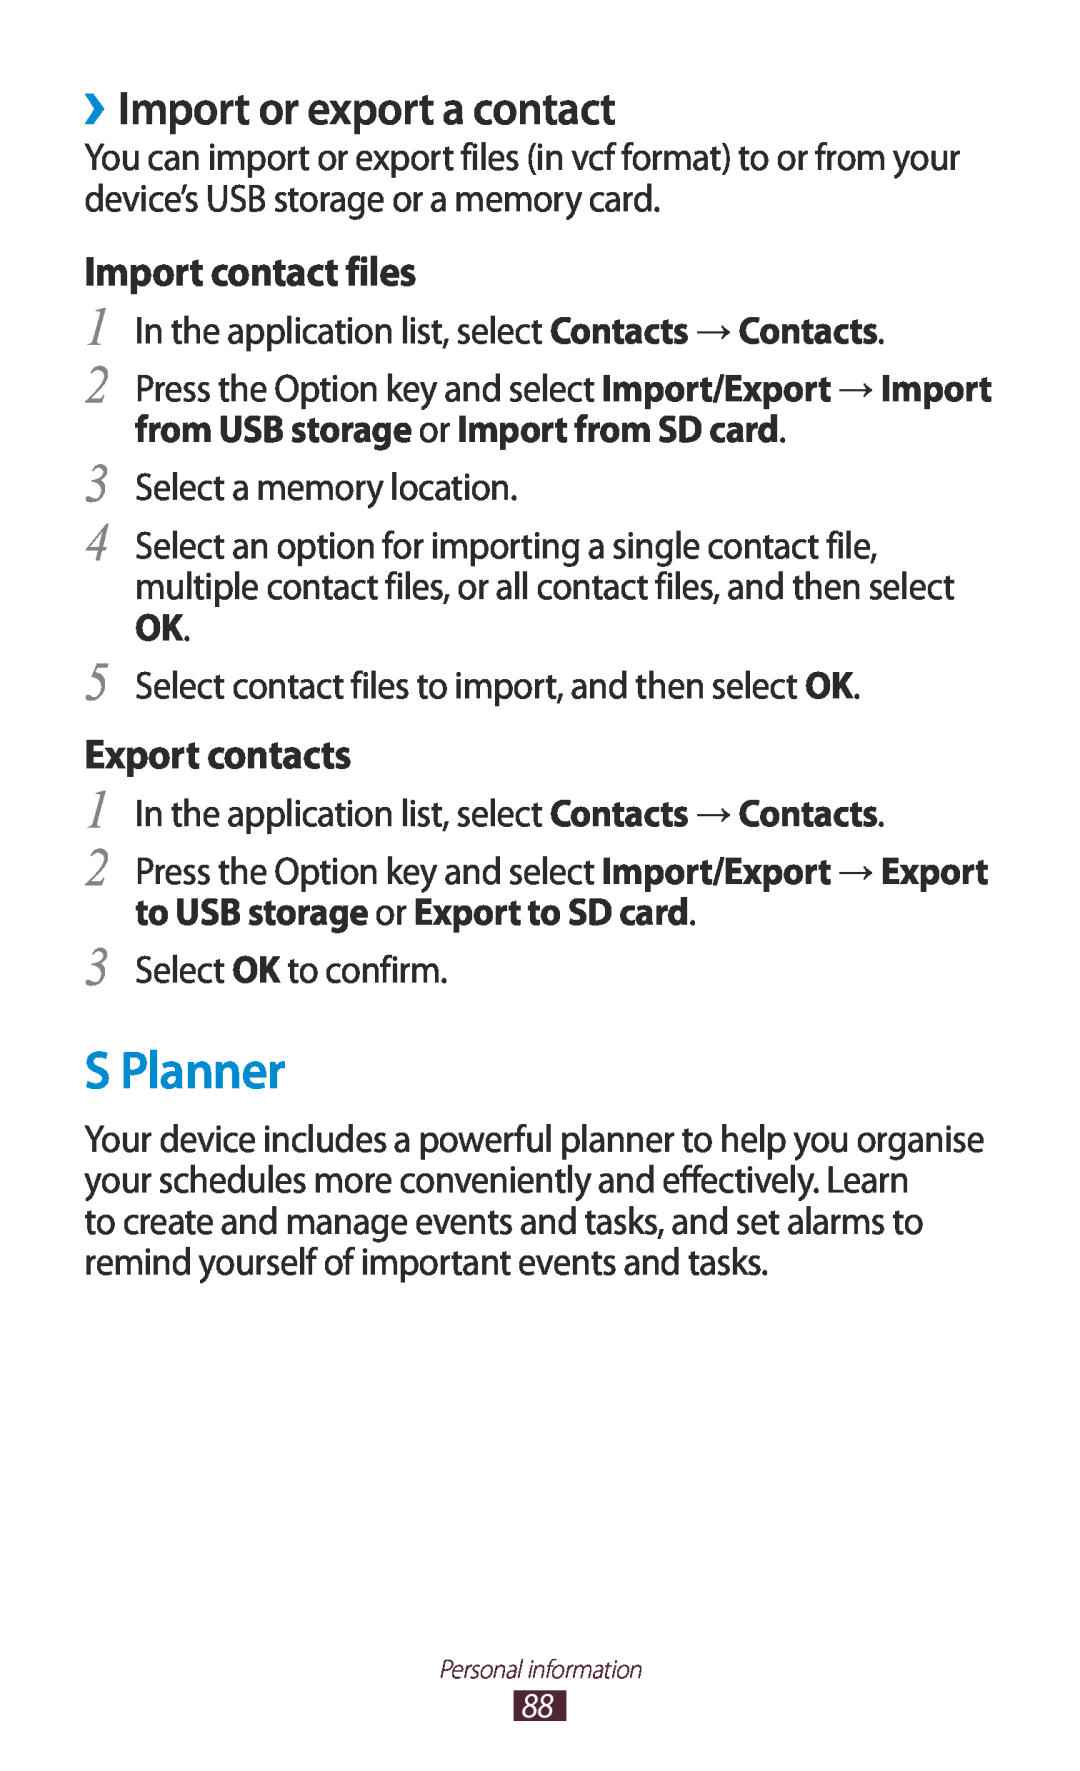 Samsung GT-S7560UWASFR, GT-S7560ZKAVDR manual S Planner, ››Import or export a contact, Import contact files, Export contacts 